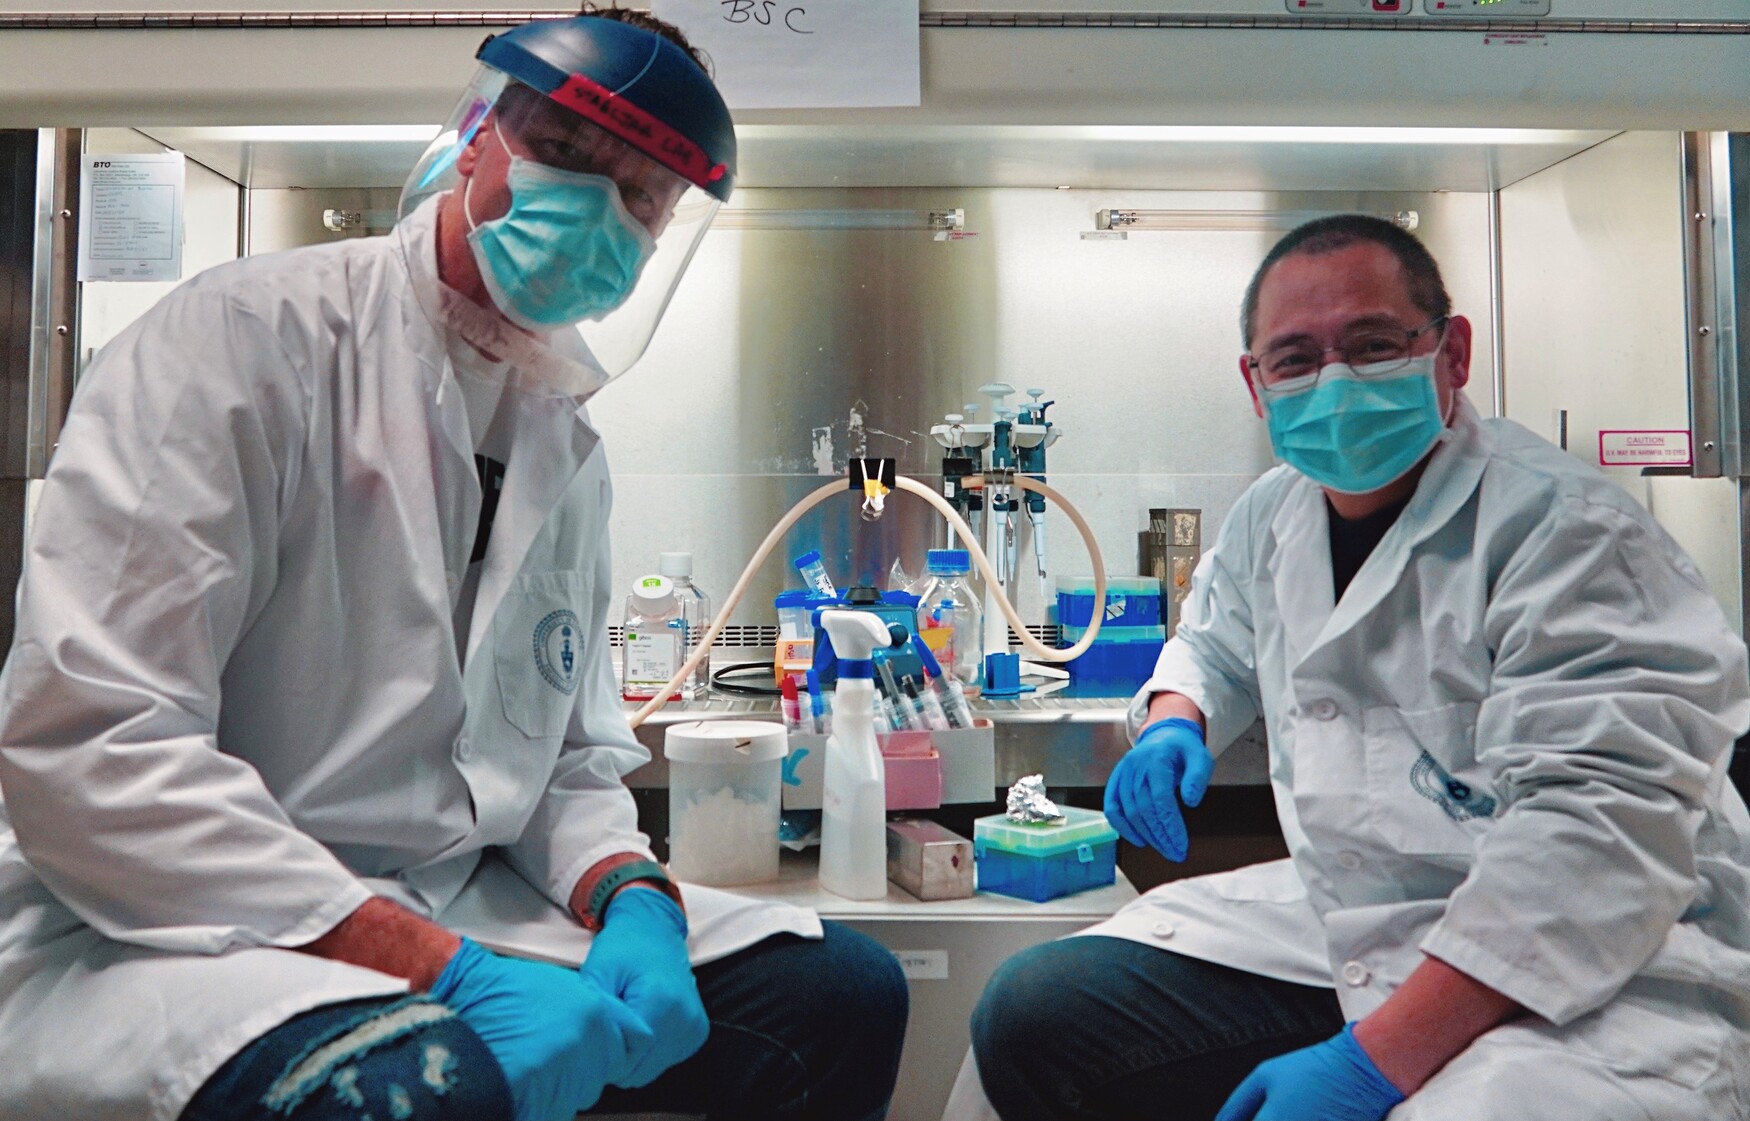 Researchers in the lab wearing protective gear